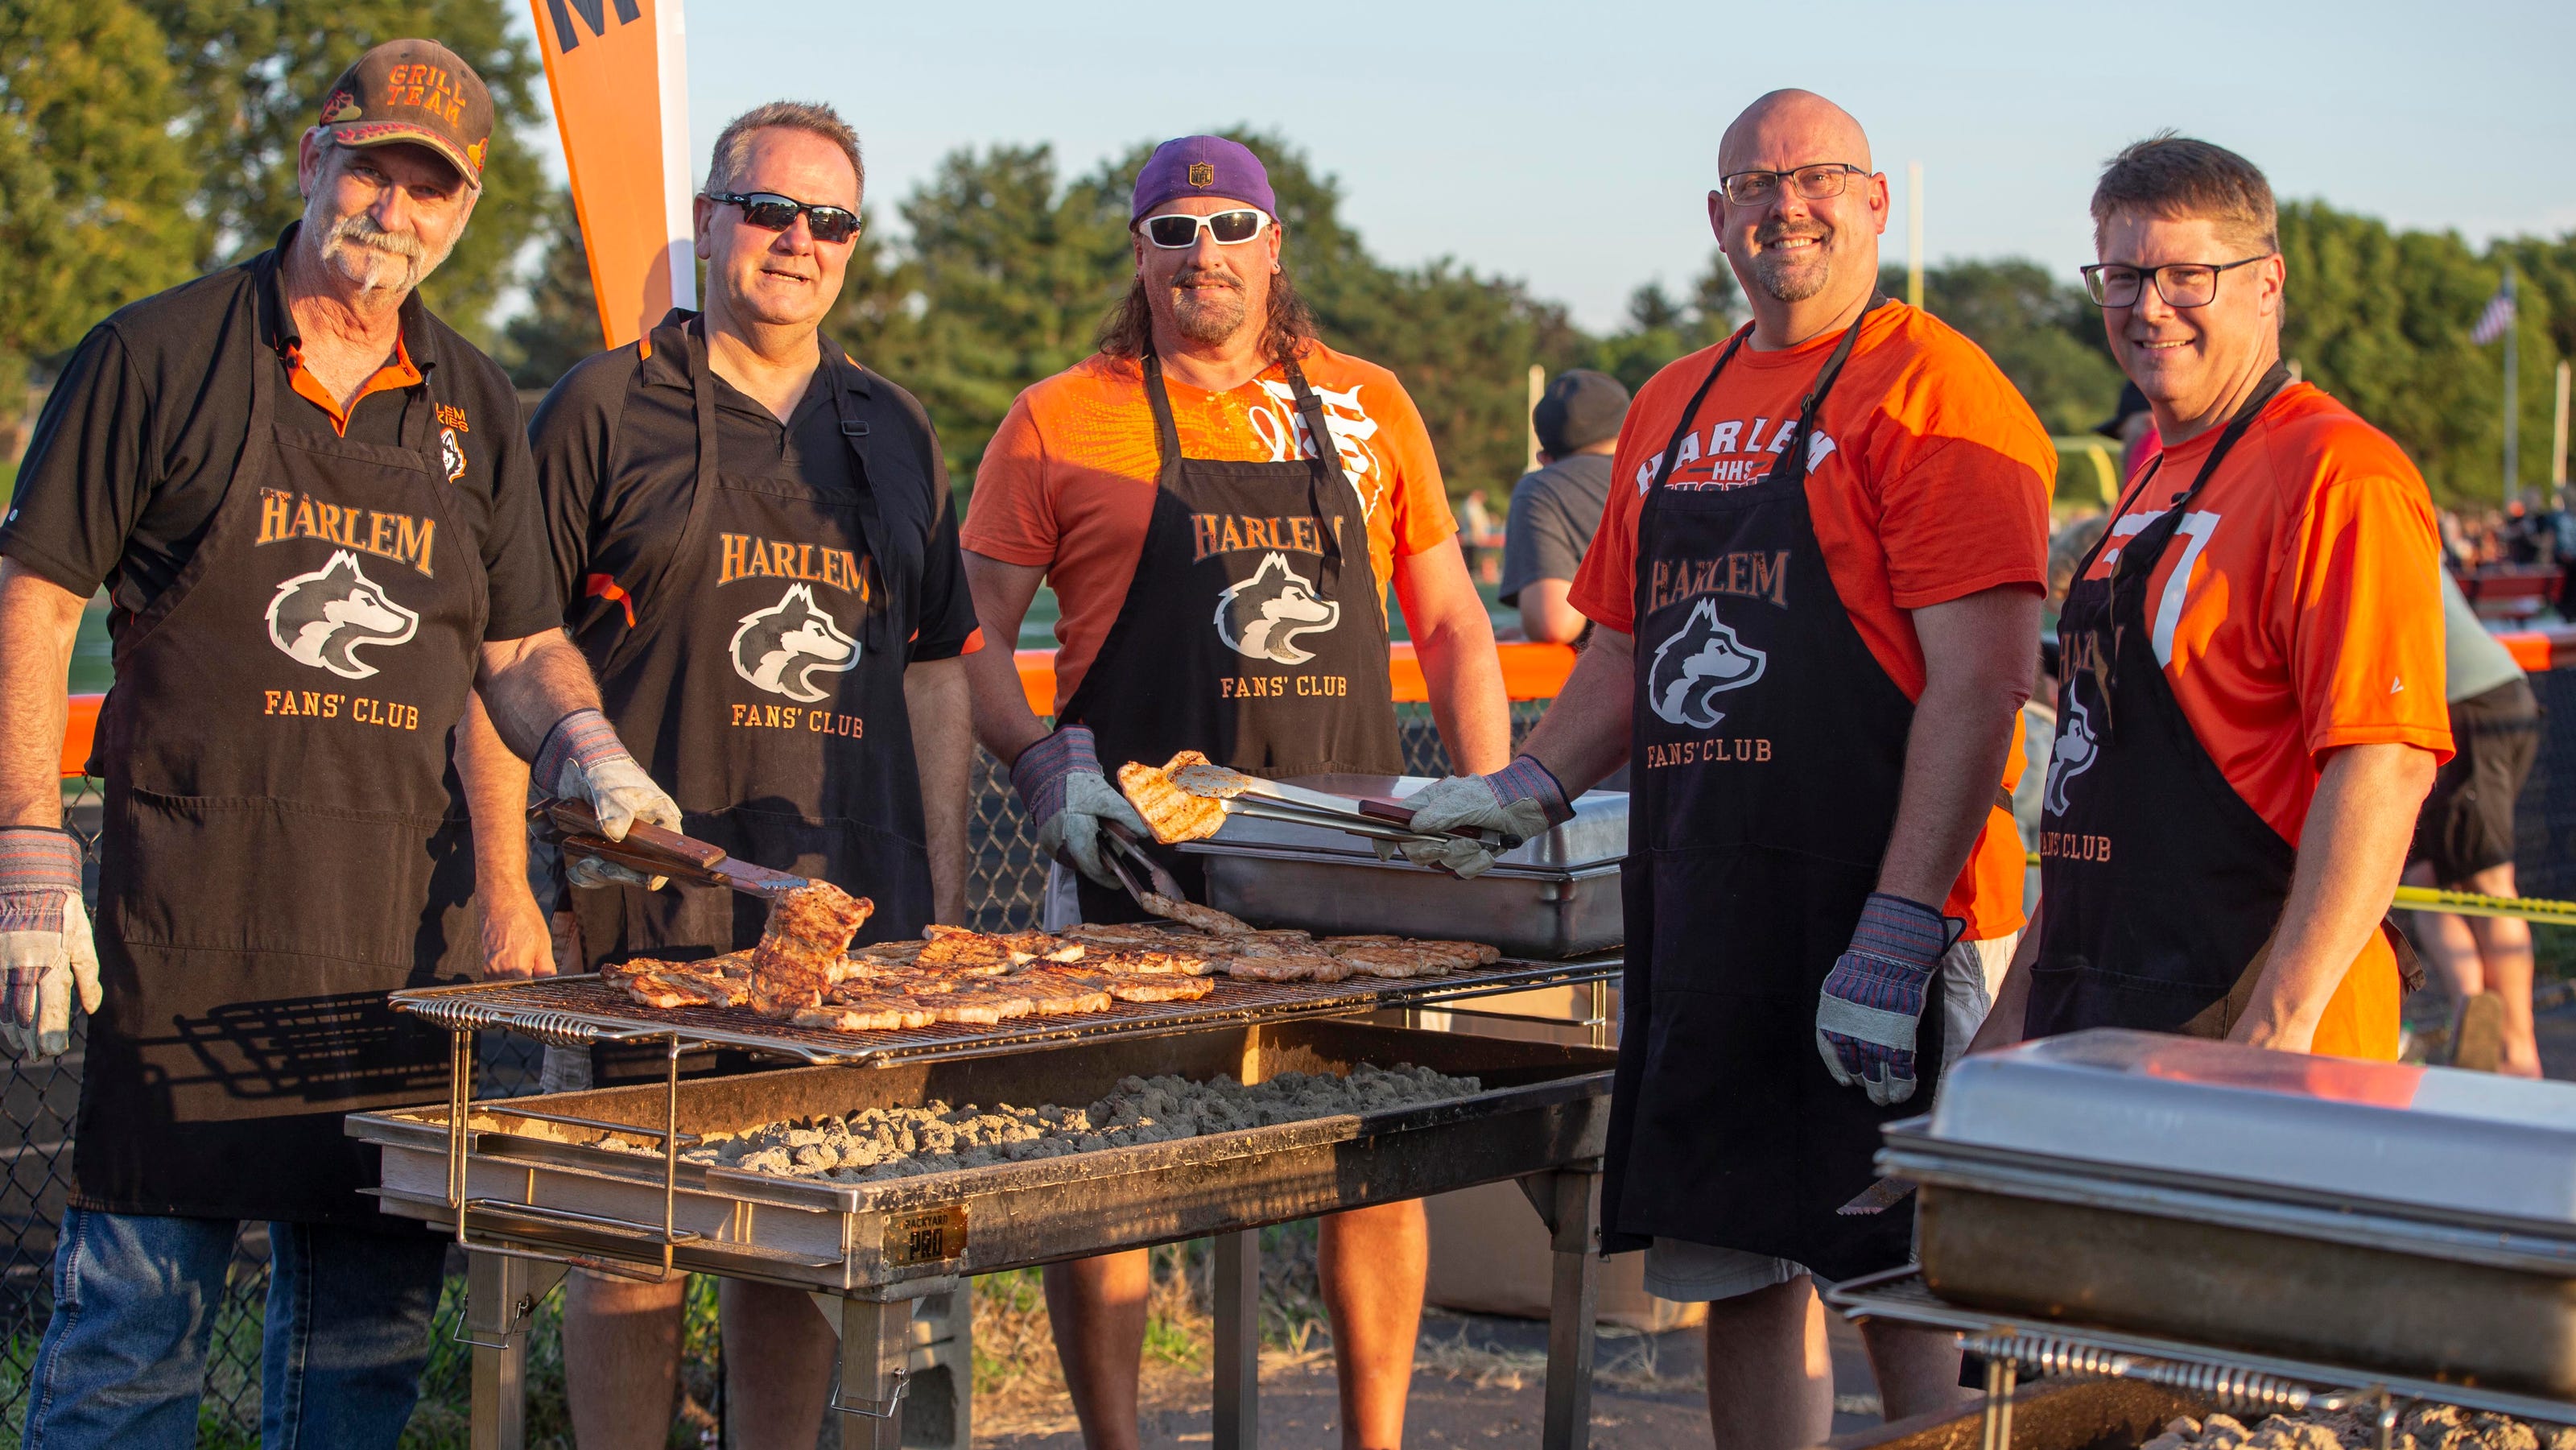   
																Friday Night Eats: Alumni from this Rockford area school know how to keep fans happy, fed 
															 